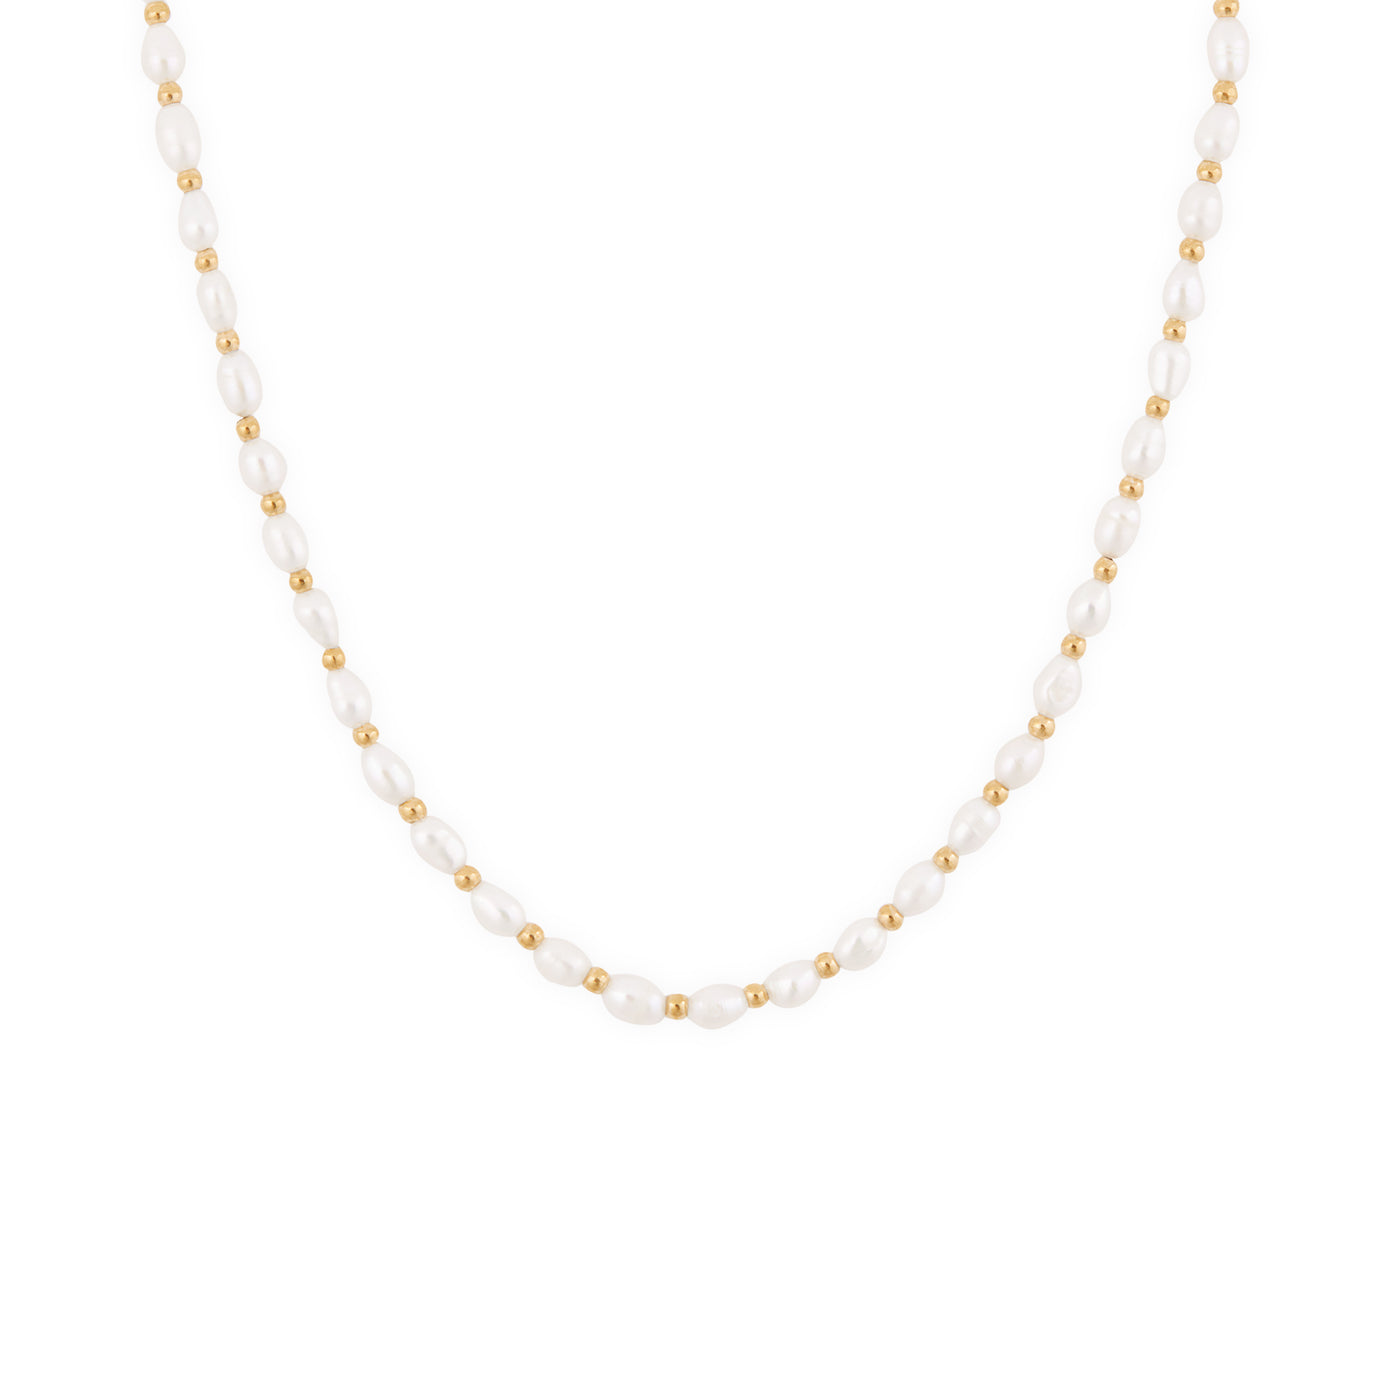 Lagoon Pearl Necklace - Gold Lagoon Pearl Necklace - Gold